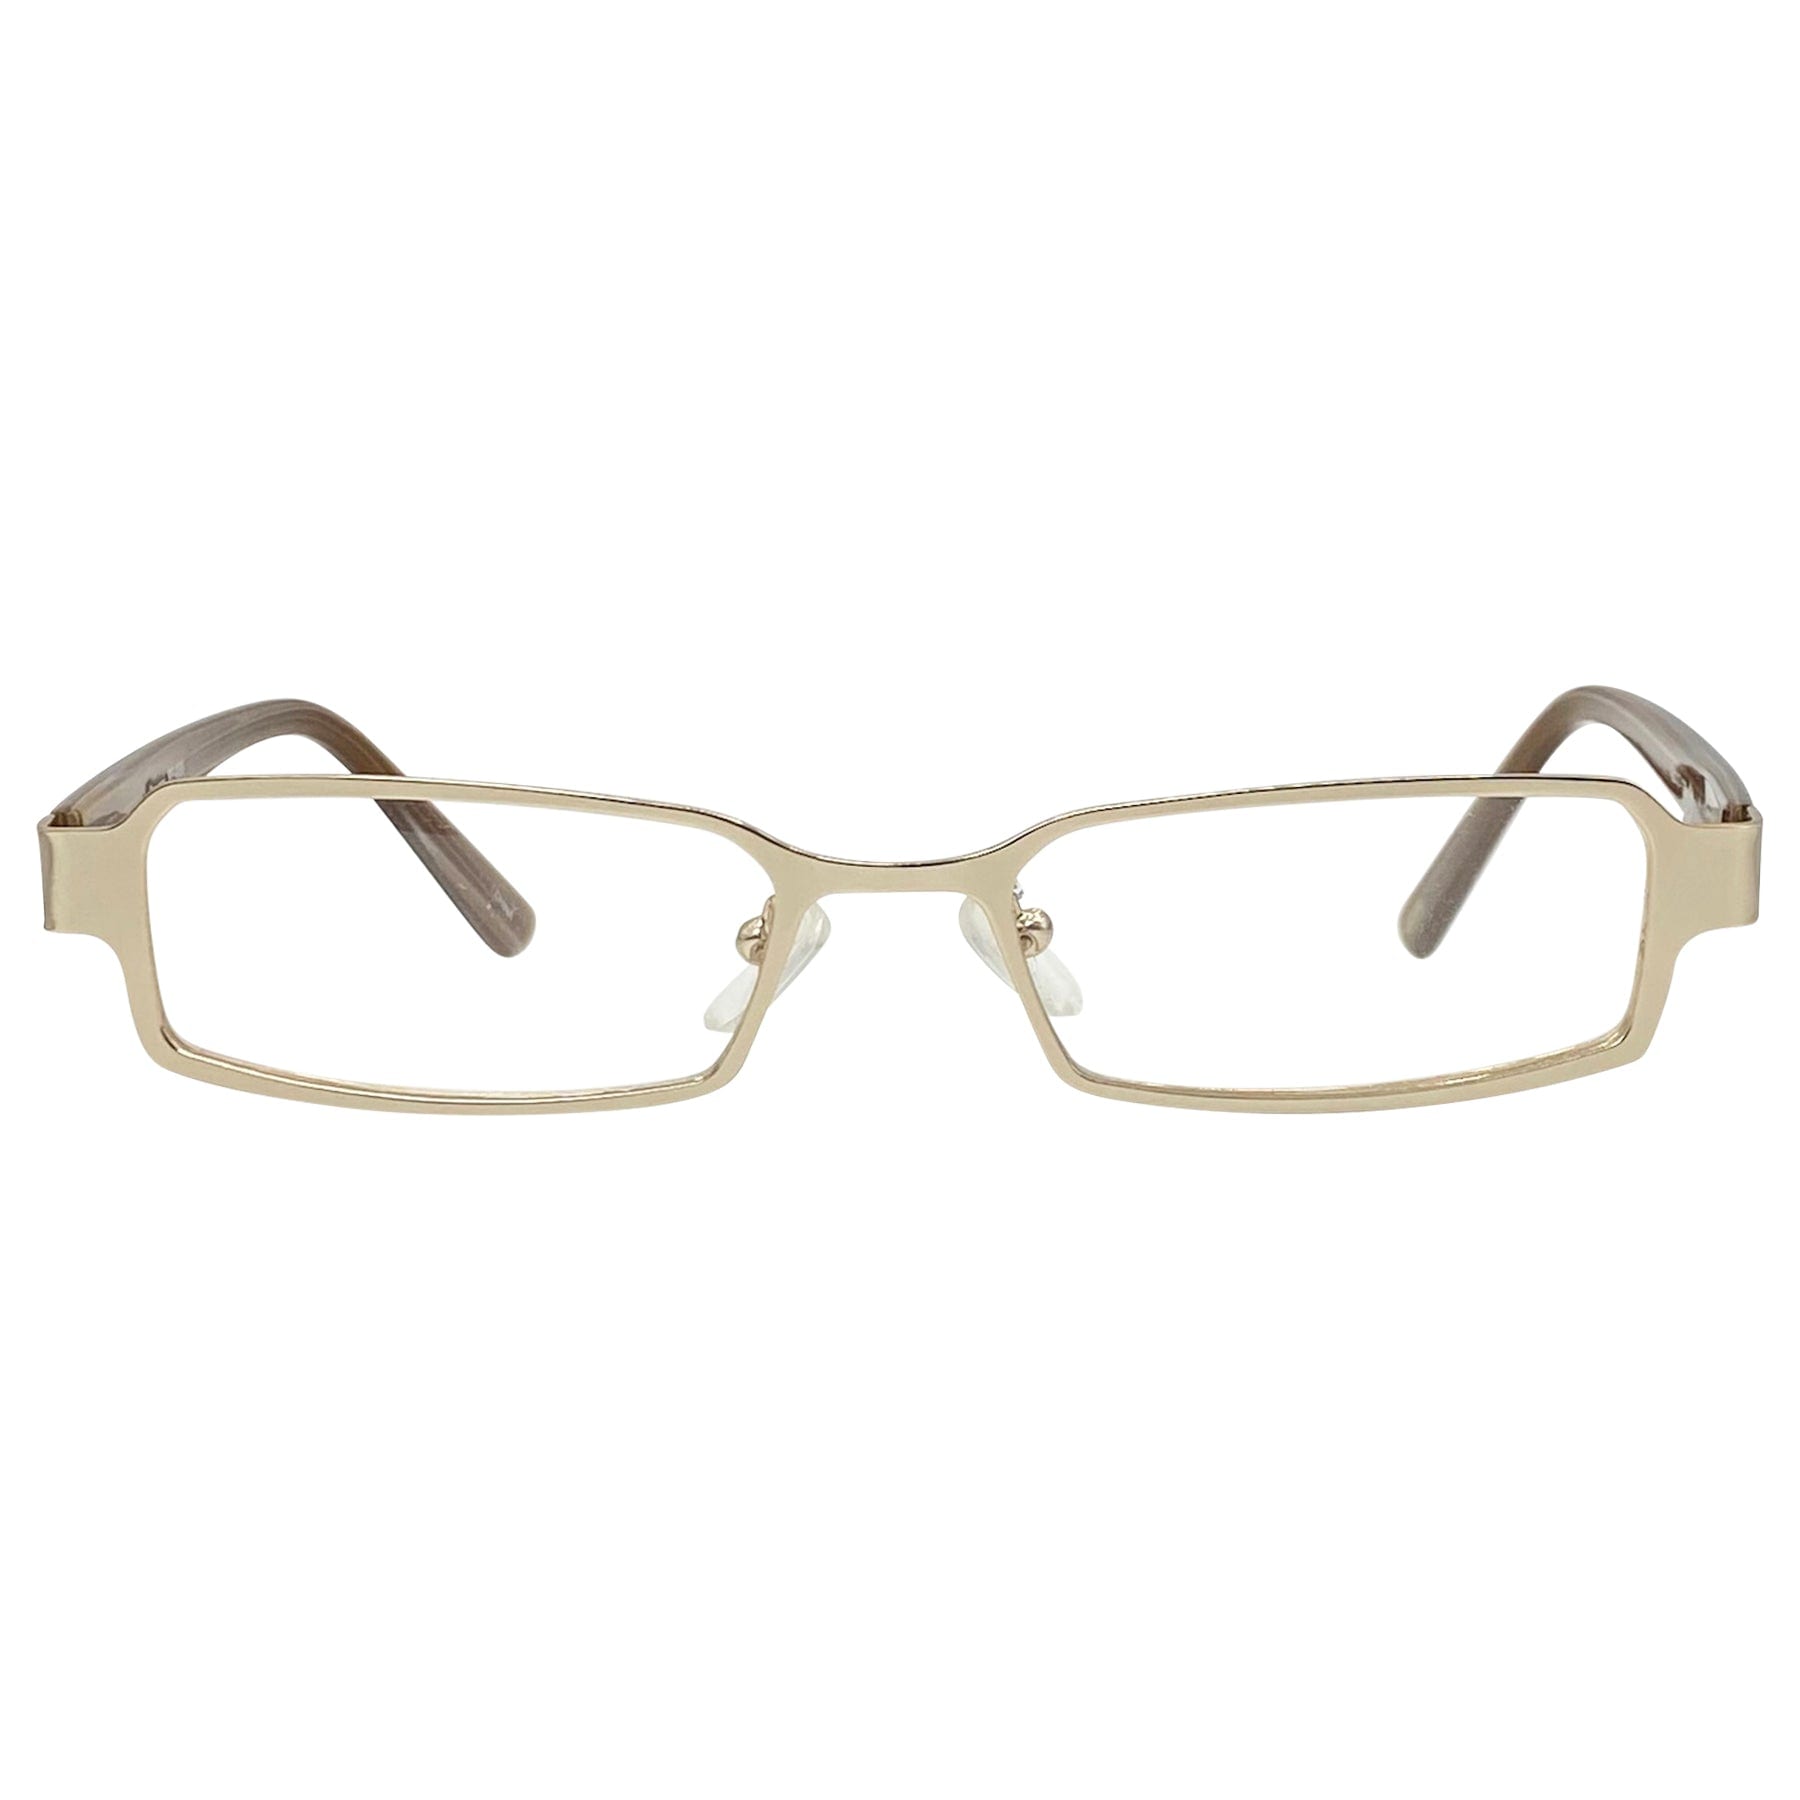 tiny glasses with a gold metal frame and 90s style